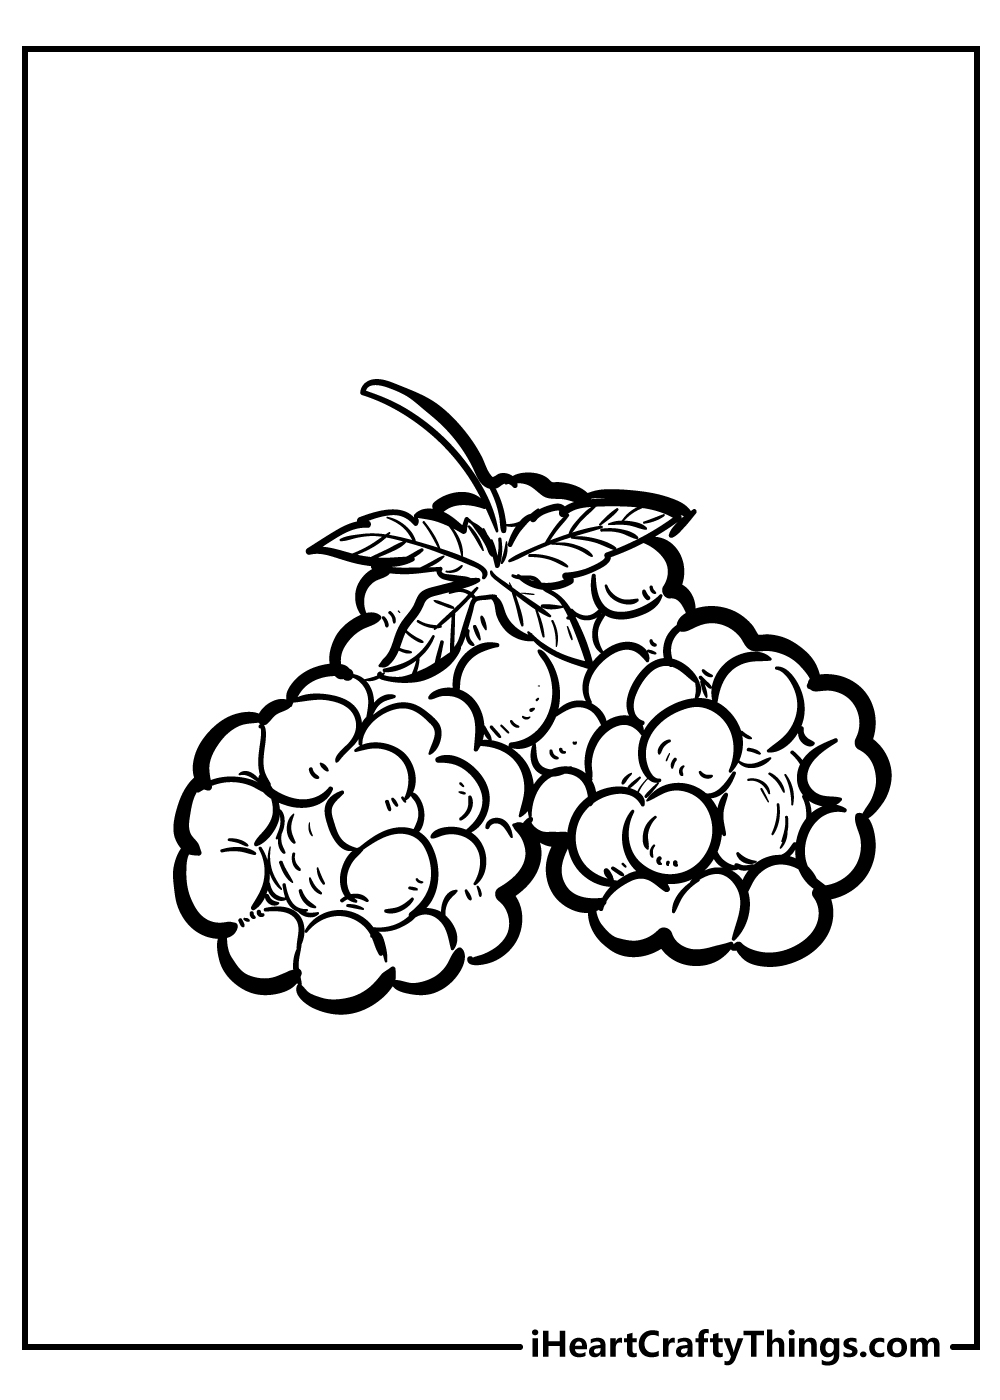 Fruit Coloring Book for adults free download